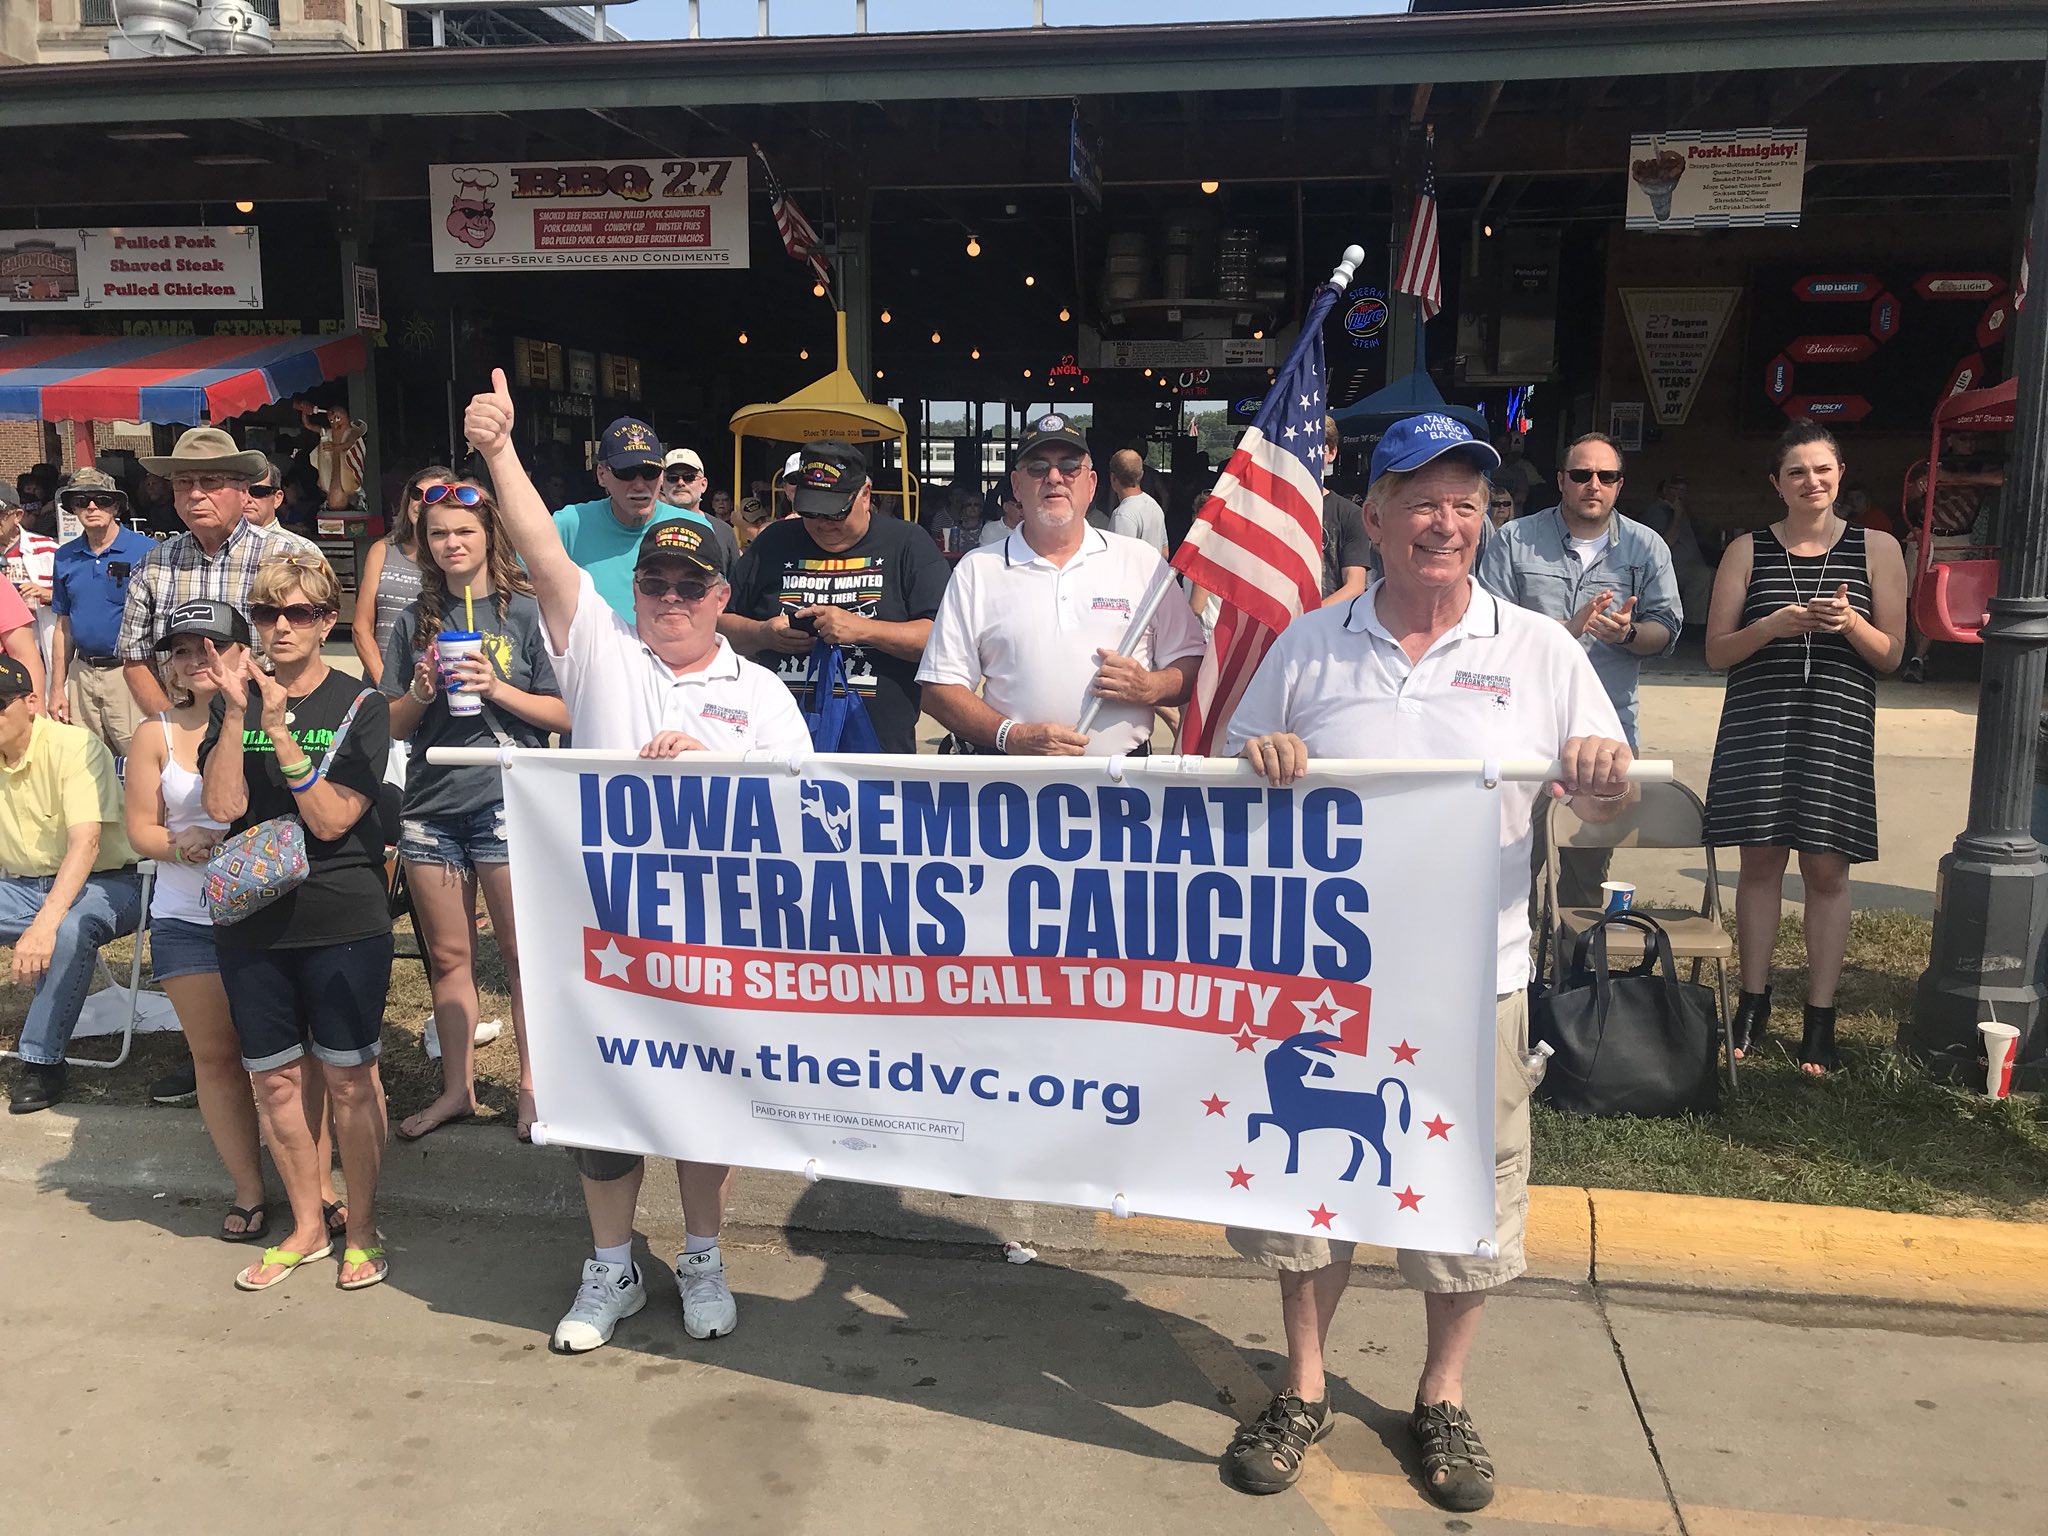 Vets Barred from Iowa State Fair Parade for being Democrats The Iowa